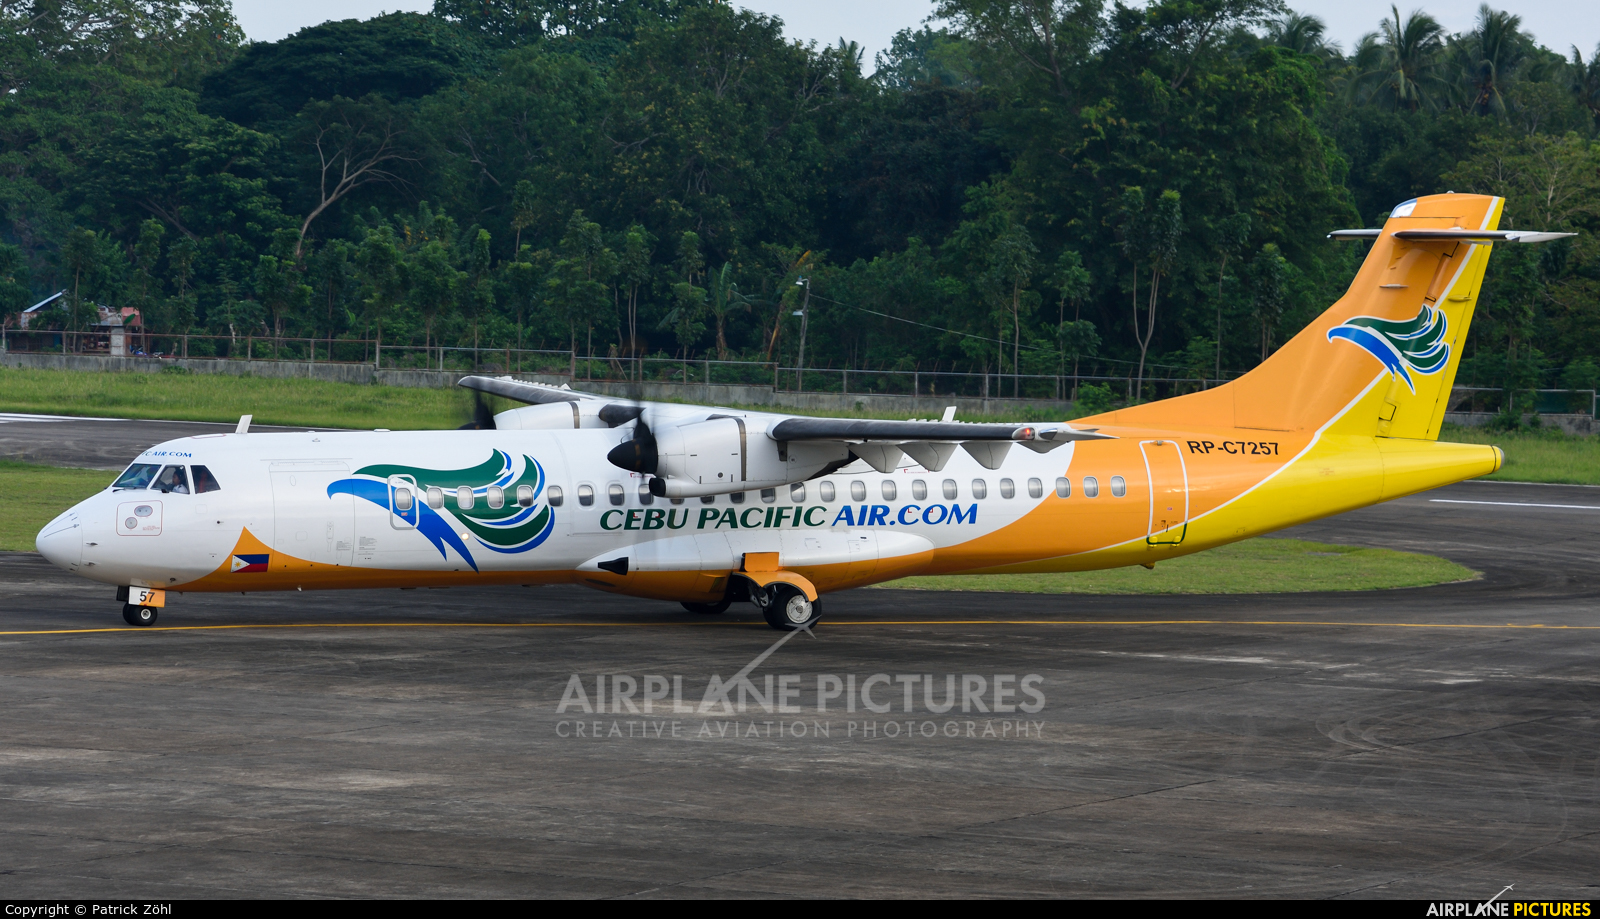 Cebu Pacific Air RP-C7257 aircraft at In Flight - Philippines